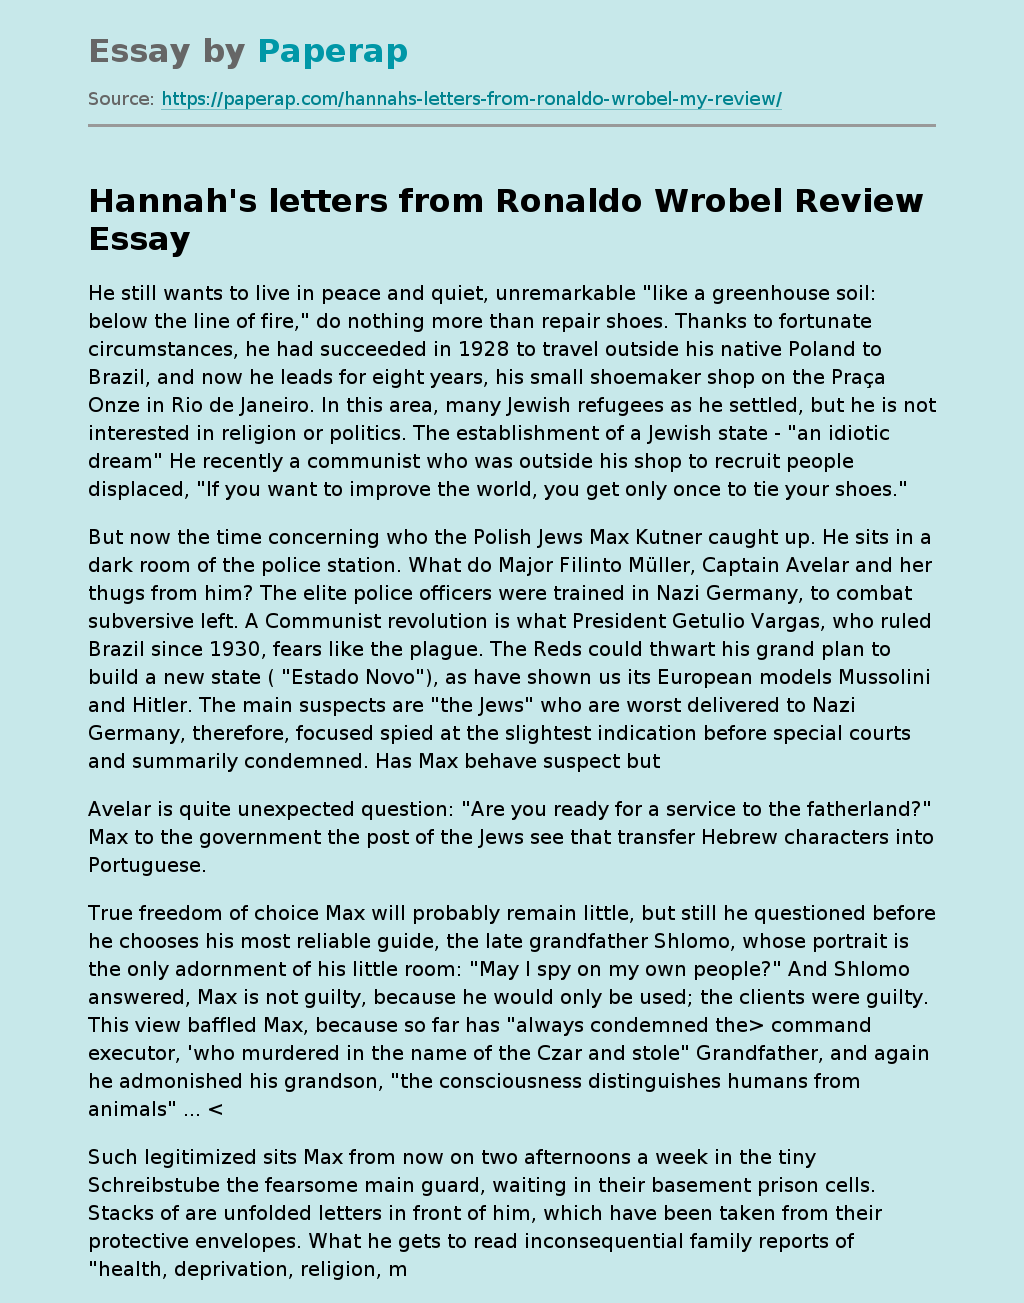 Hannah's letters from Ronaldo Wrobel Review